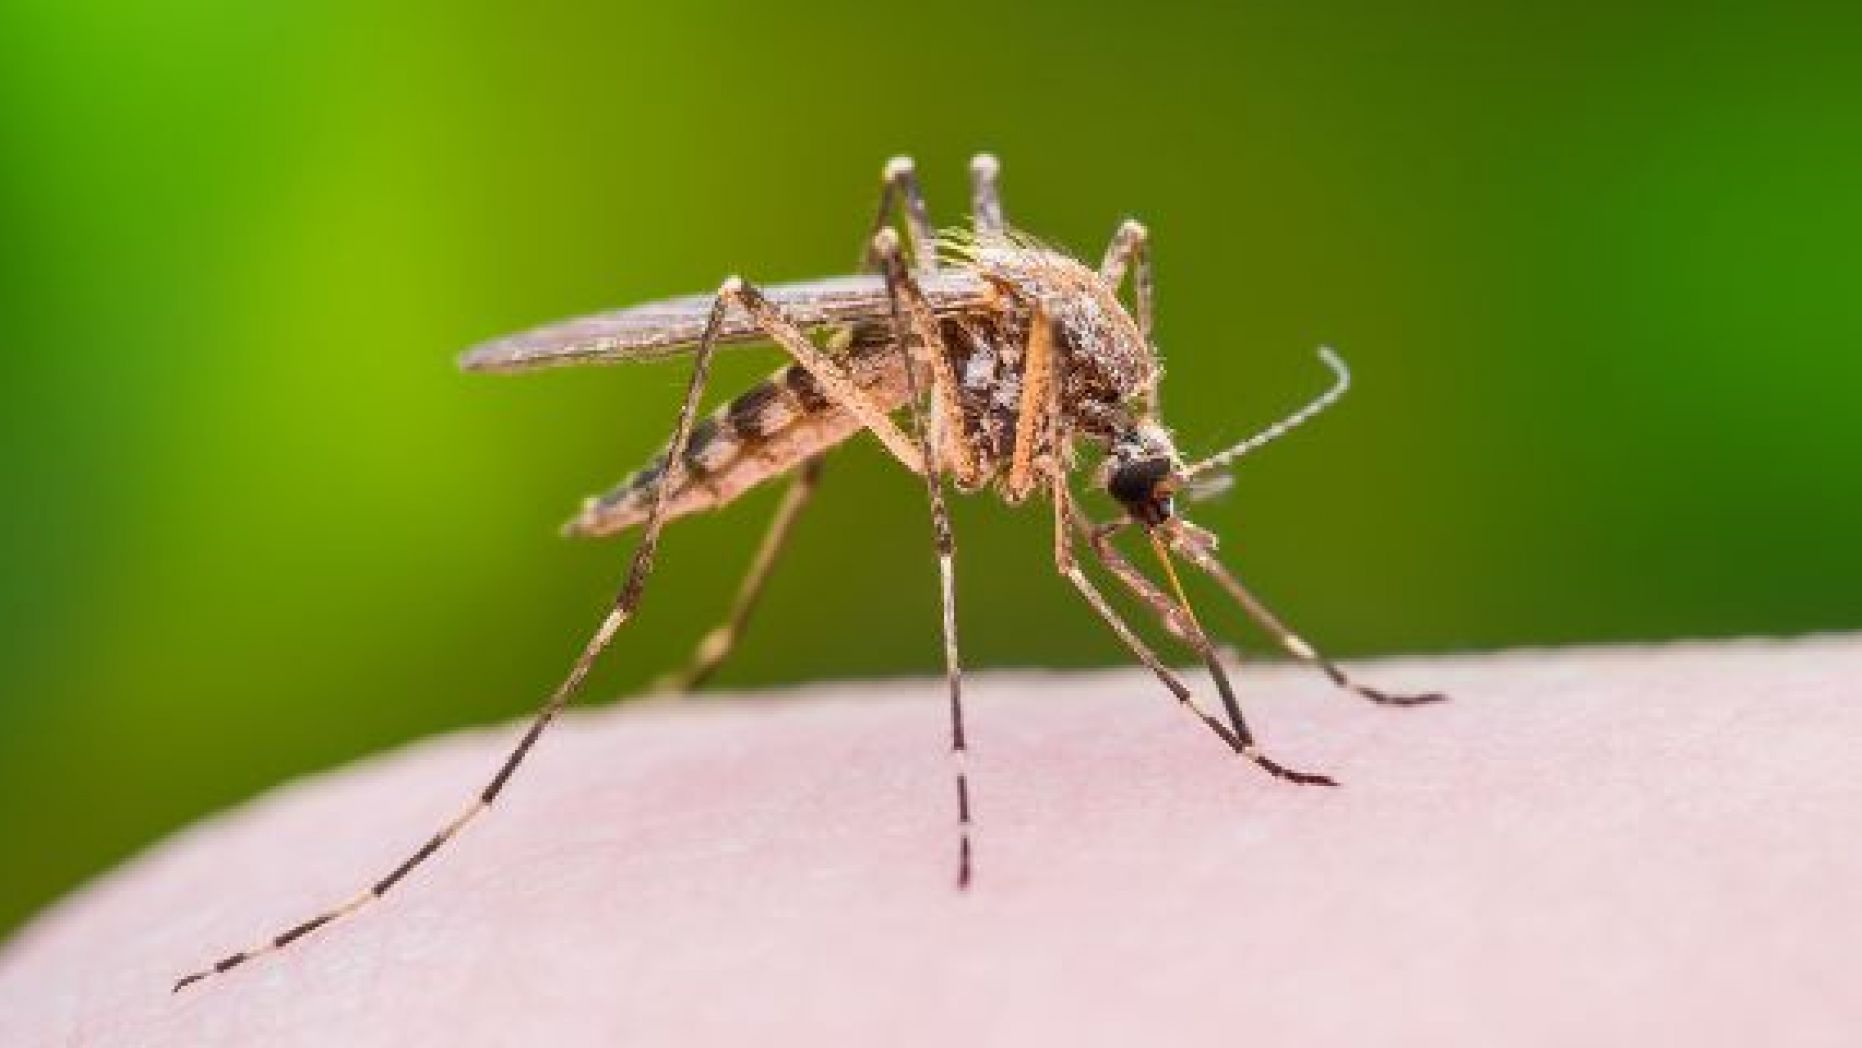 Mosquitoes can spread the West Nile virus.